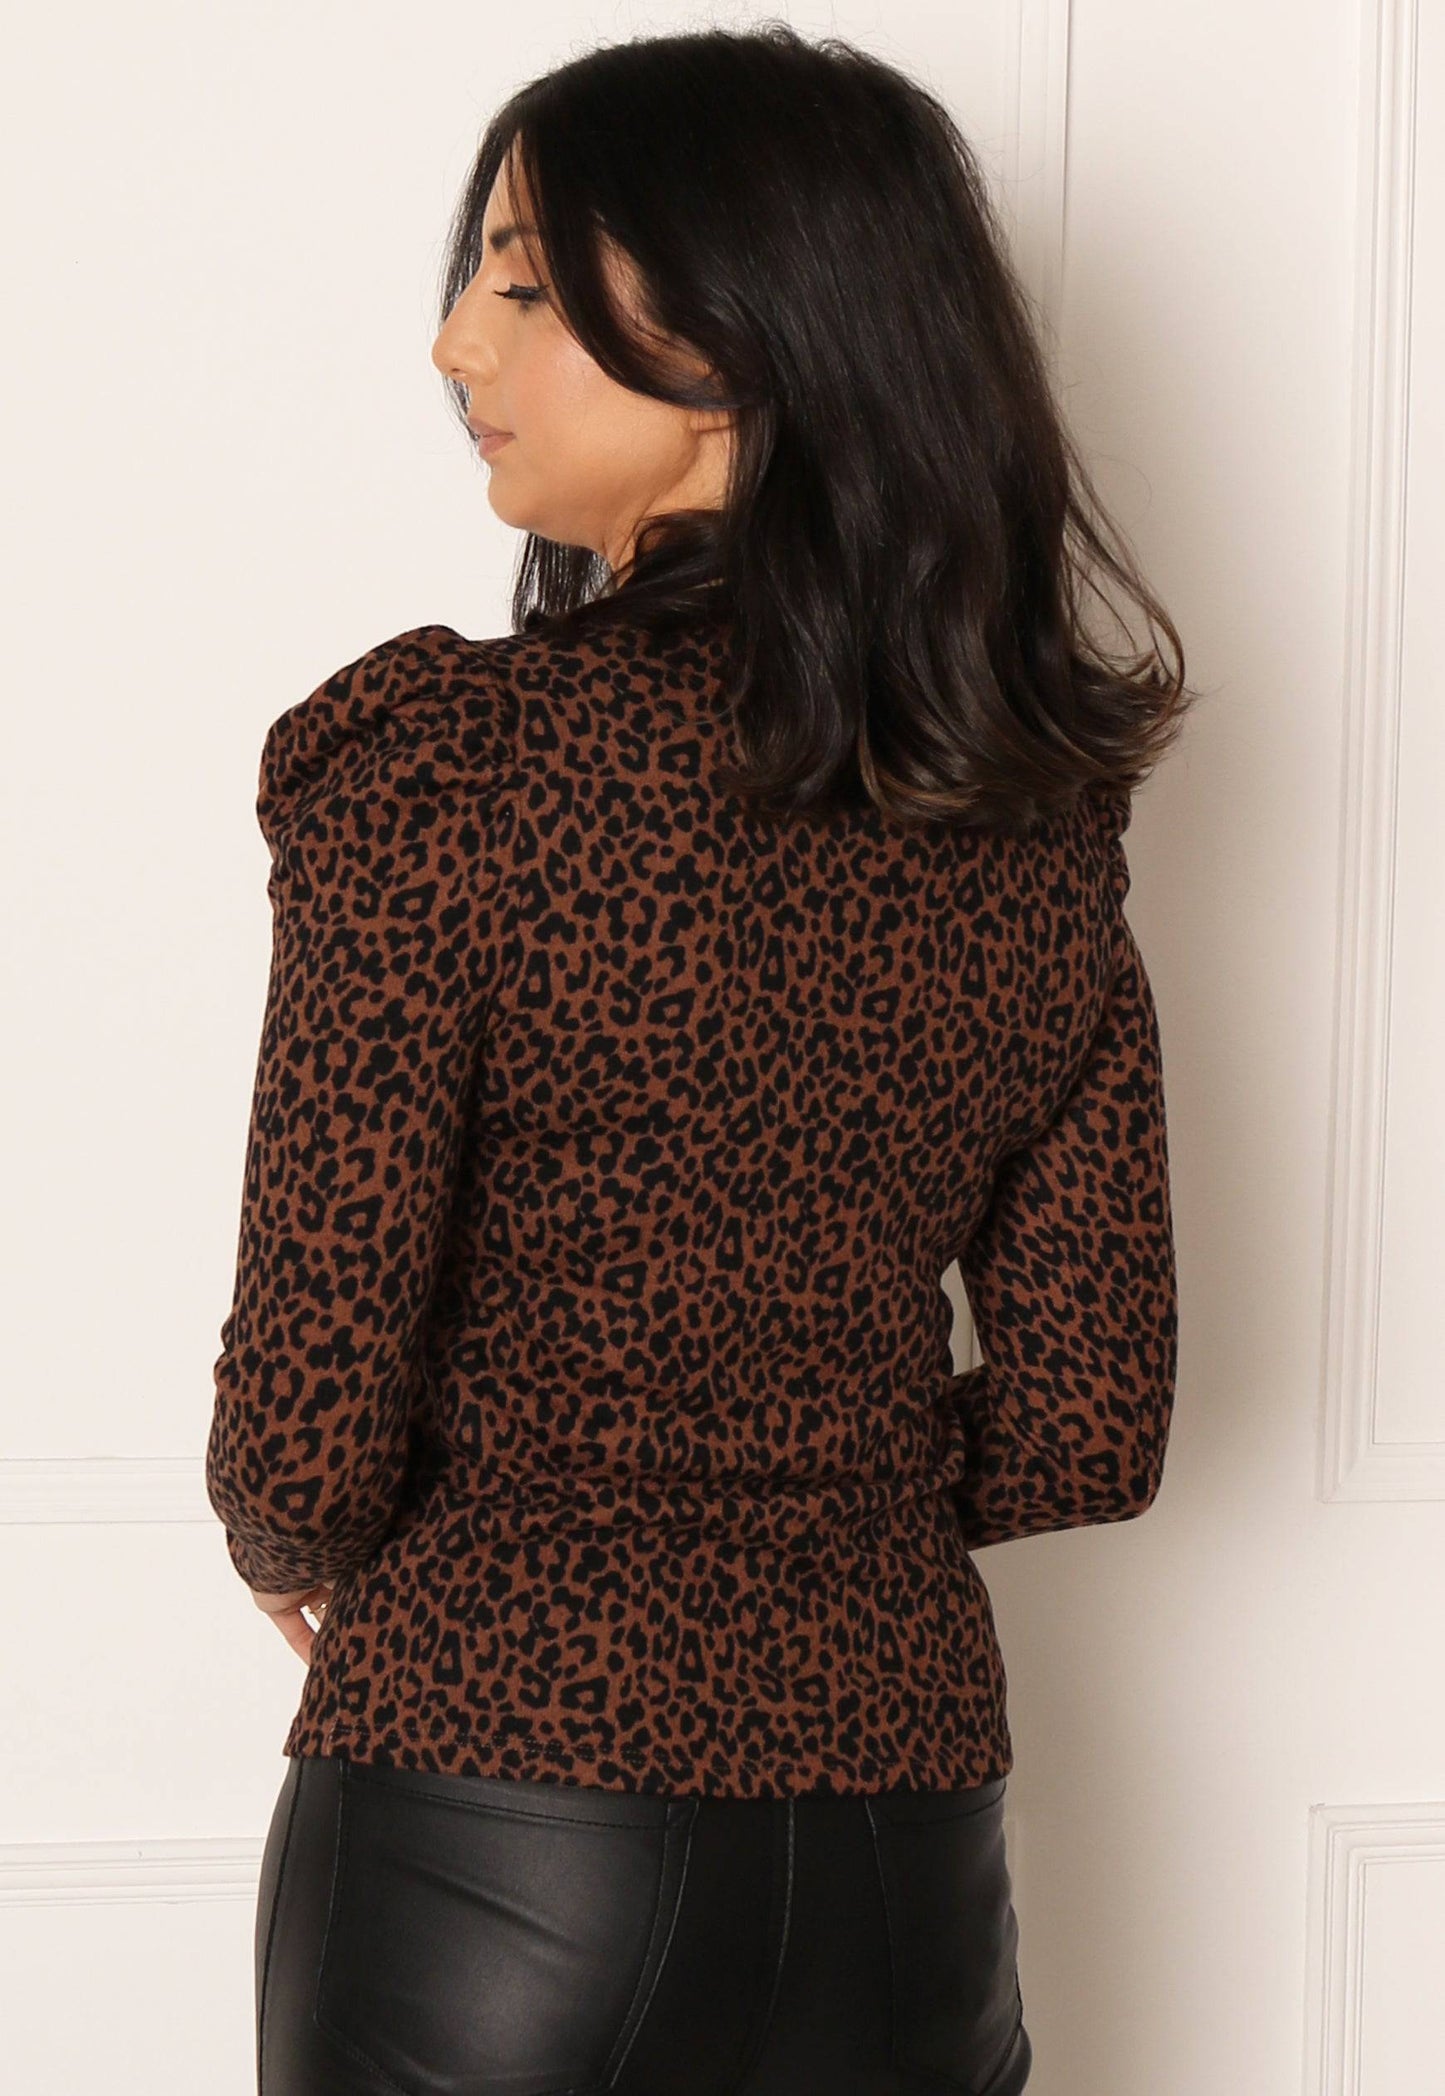 JDY Tonsy Leopard Puff Sleeve Top in Black & Brown - One Nation Clothing